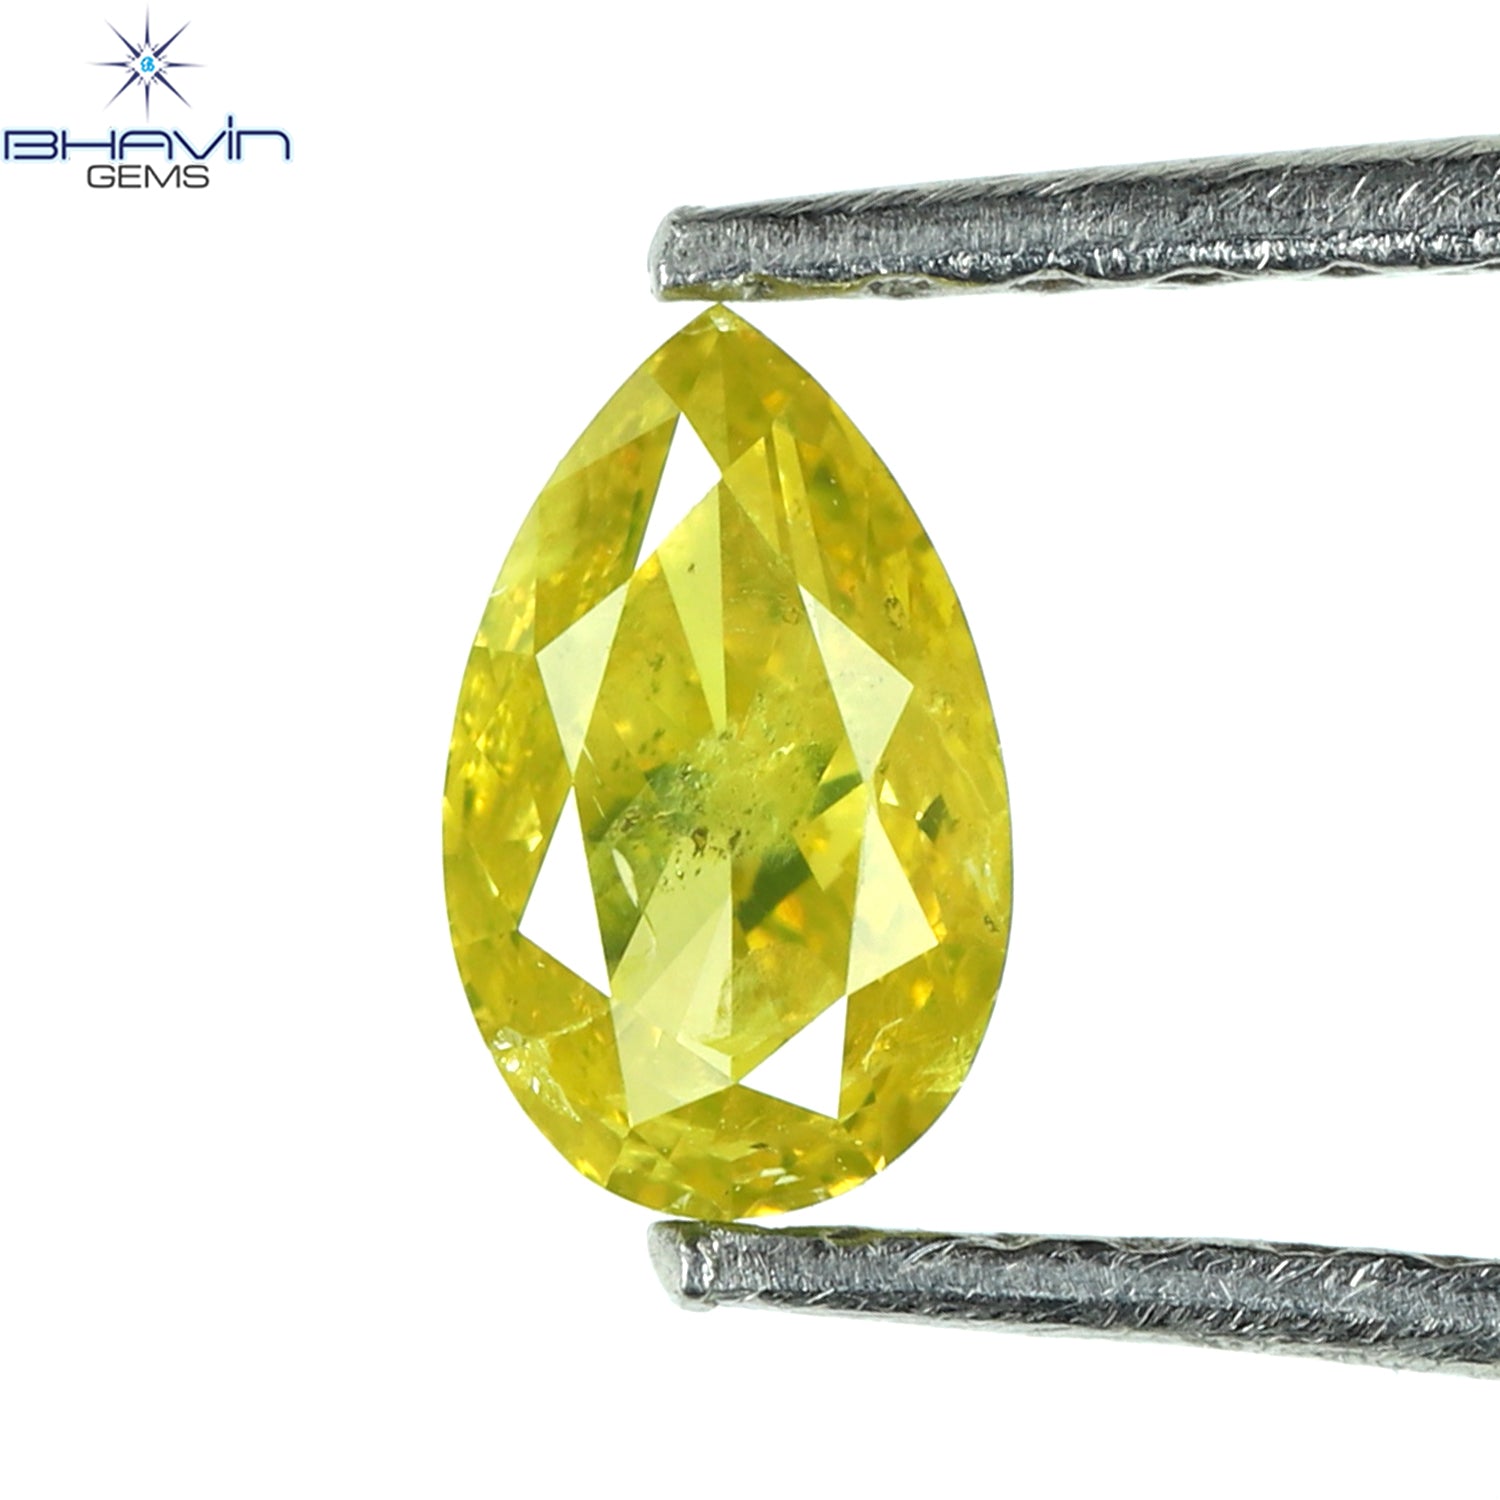 0.30 CT Pear Shape Natural Diamond Enhanced Yellow Color I2 Clarity (5.51 MM)